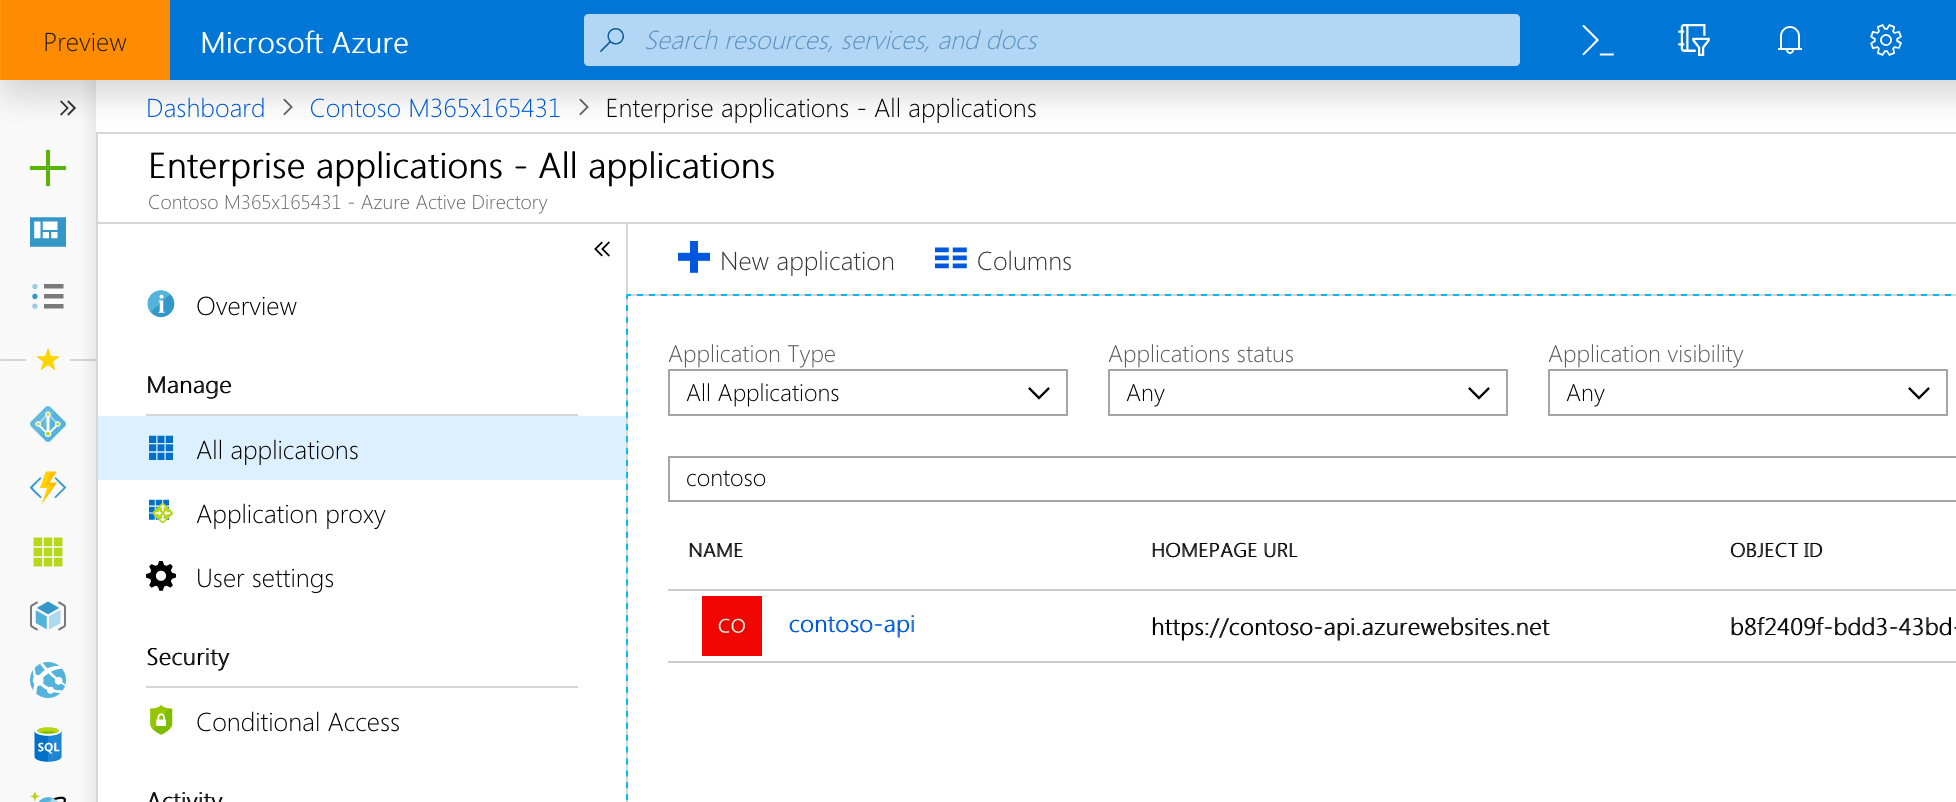 Azure AD application used to secure the API listed among Enterprise applications